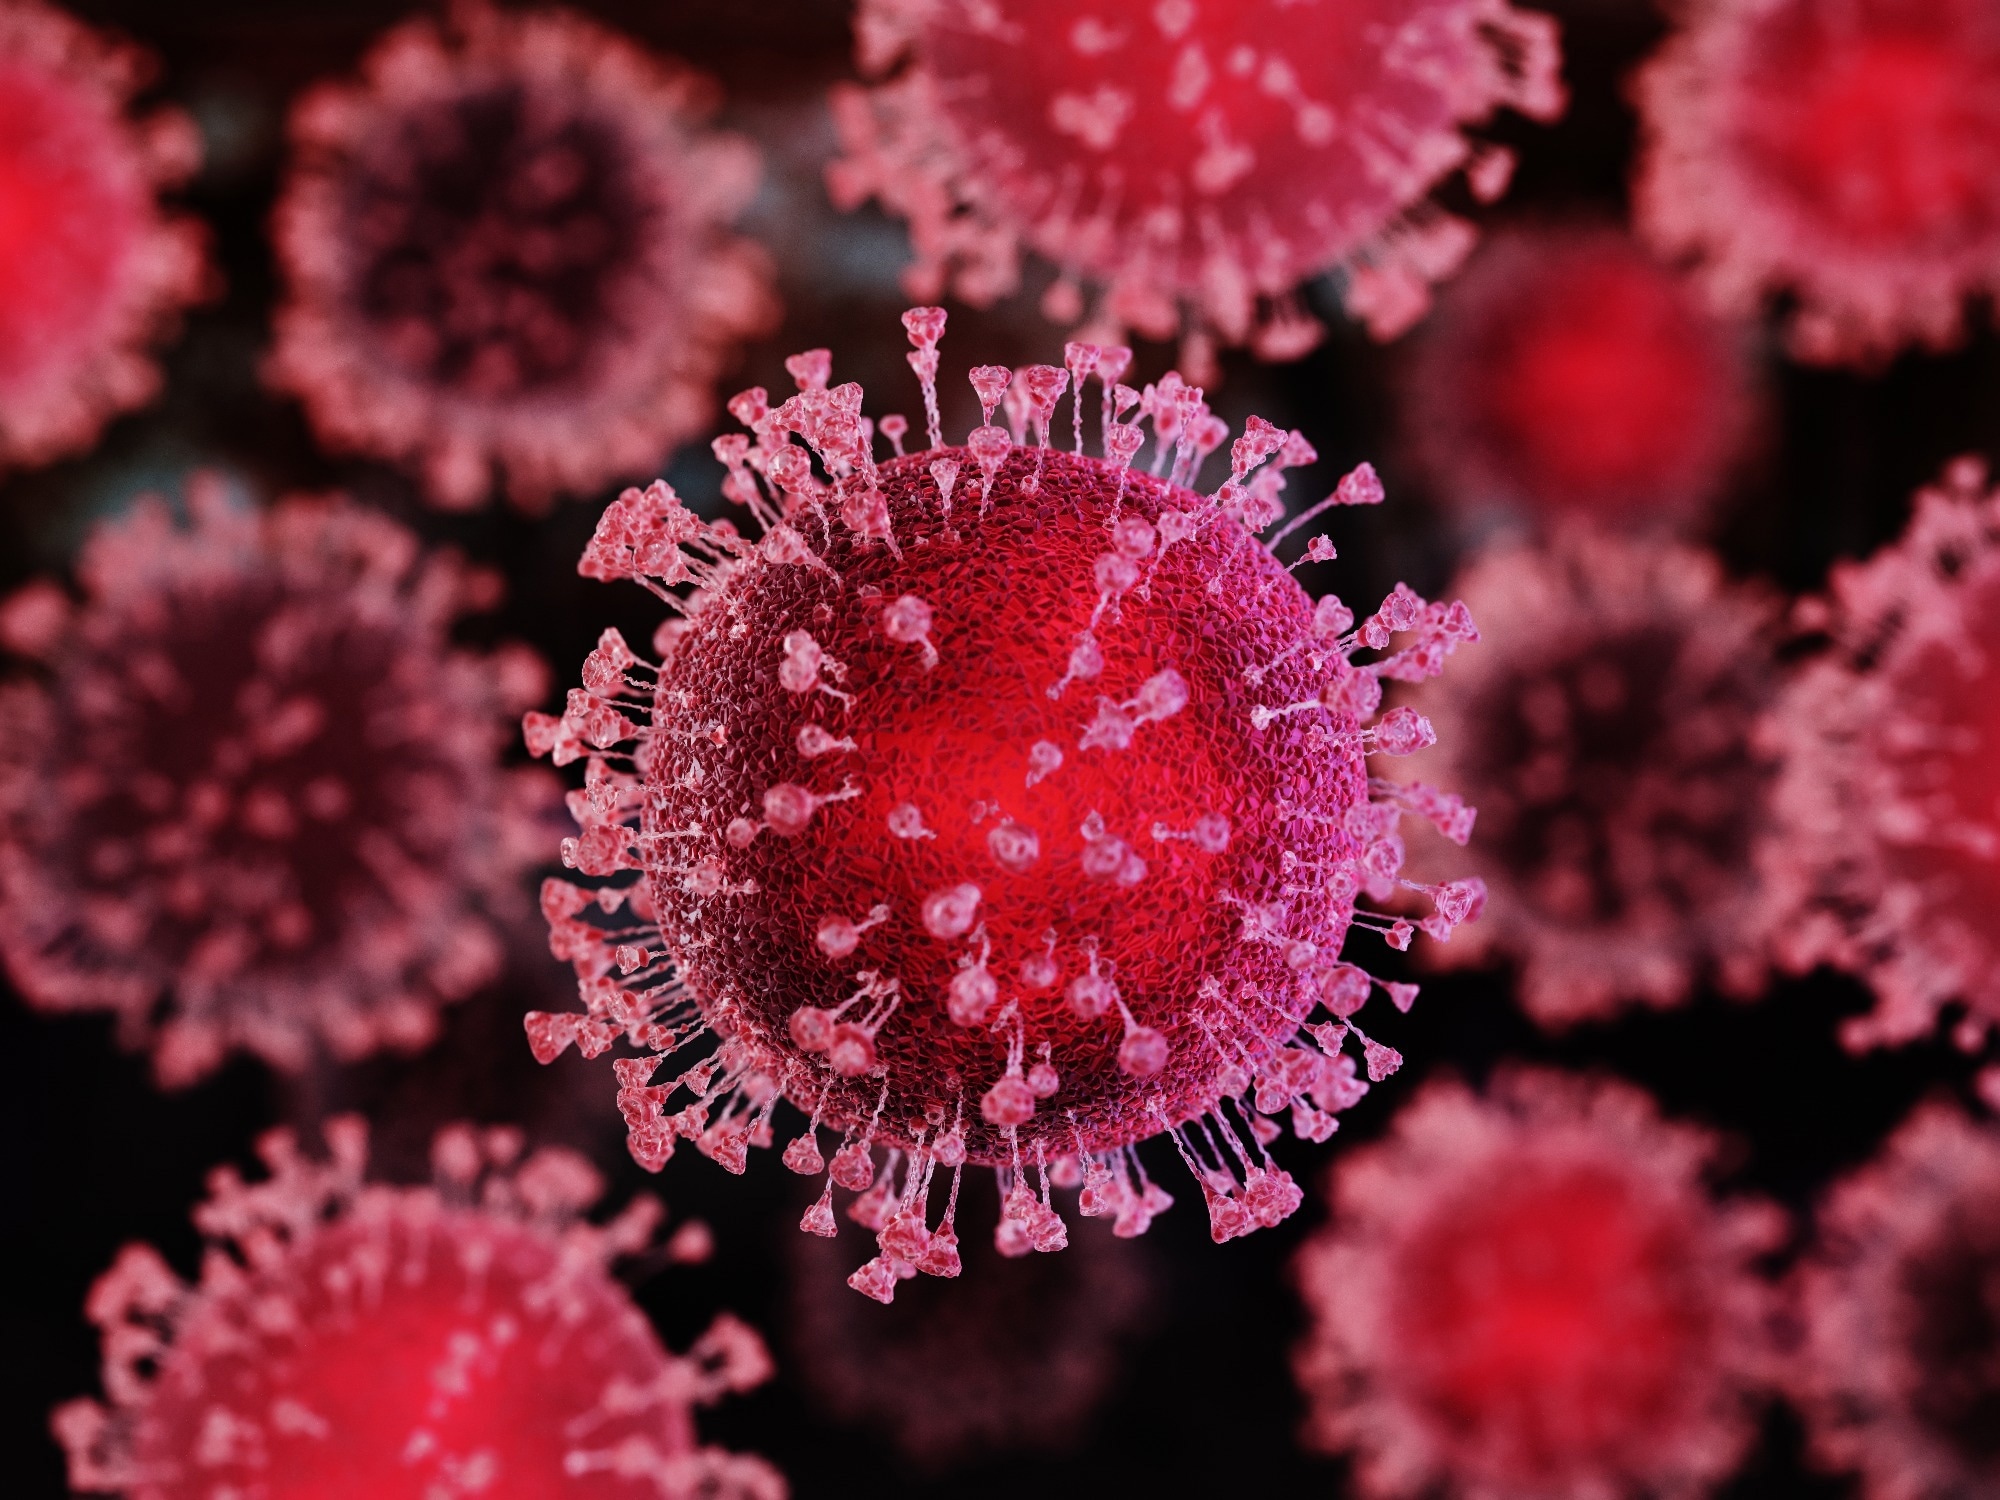 Study: Humoral immune response to omicron infection in long-term Wuhan-Hu-1-imprinted population. Image Credit: visualstock / Shutterstock.com